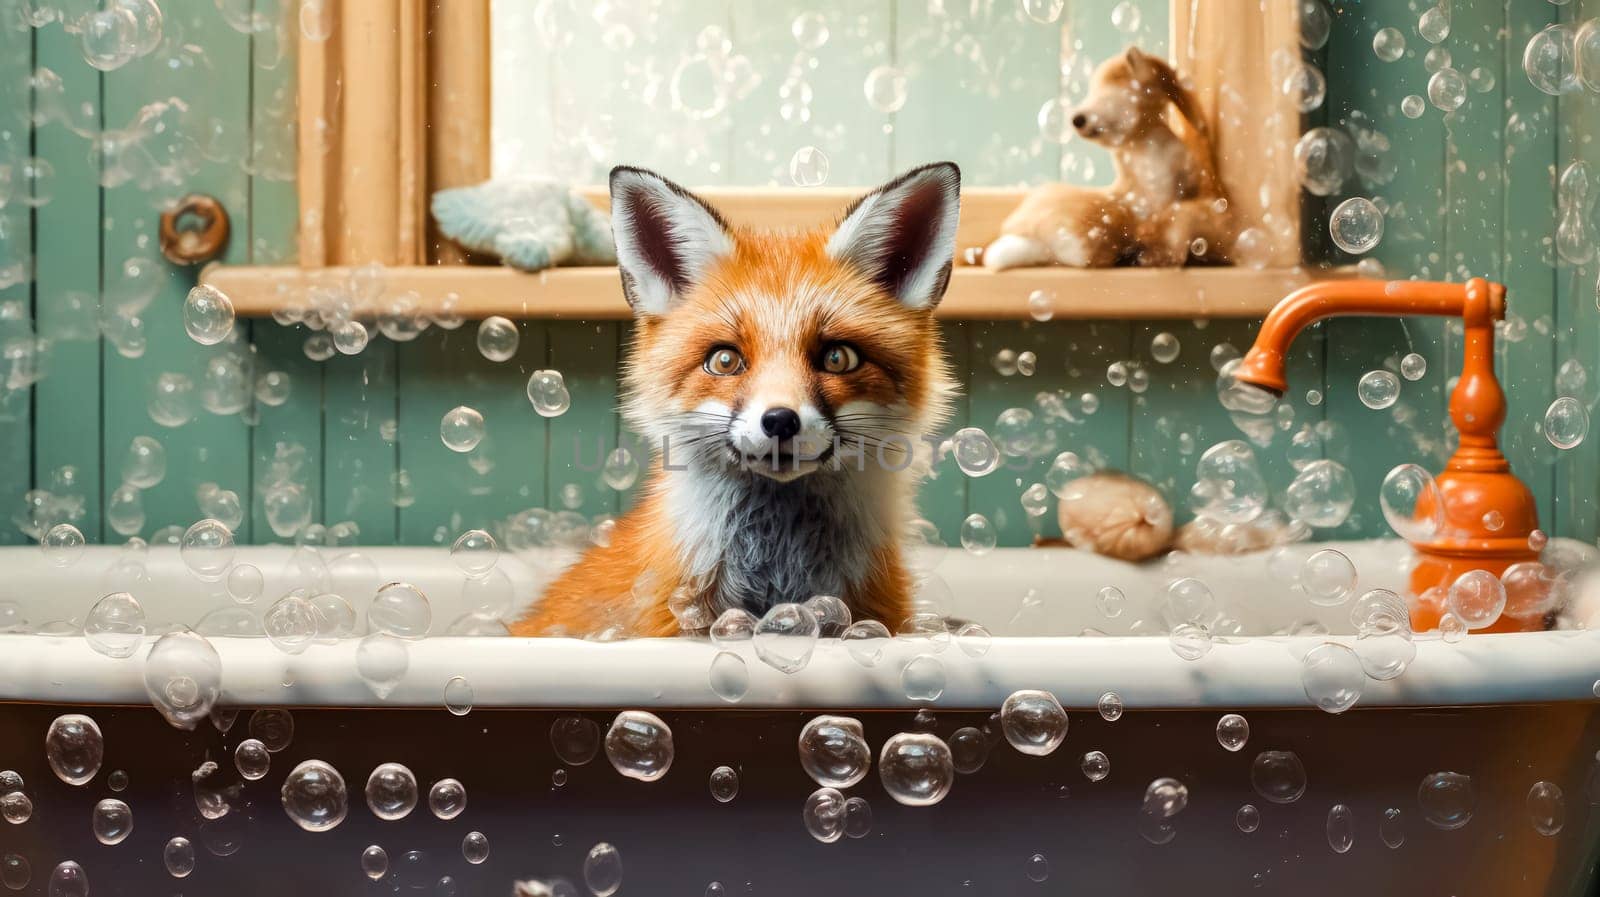 A delightful fox lounges in a bathtub surrounded by frothy soap bubbles by Alla_Morozova93